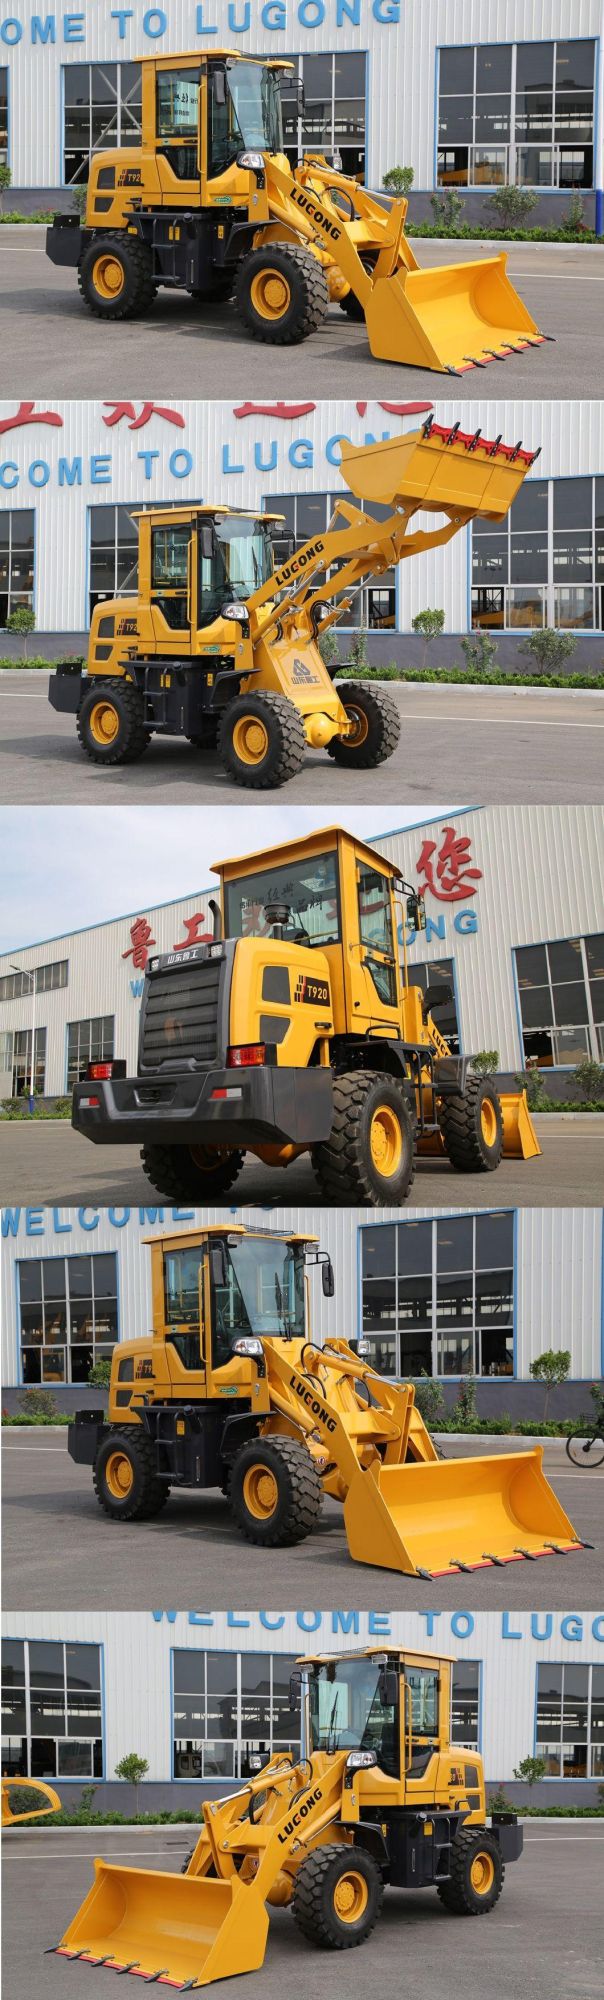 China Lugong Compact Good Condition Heavy Machinery T920 Mini Wheel Loader